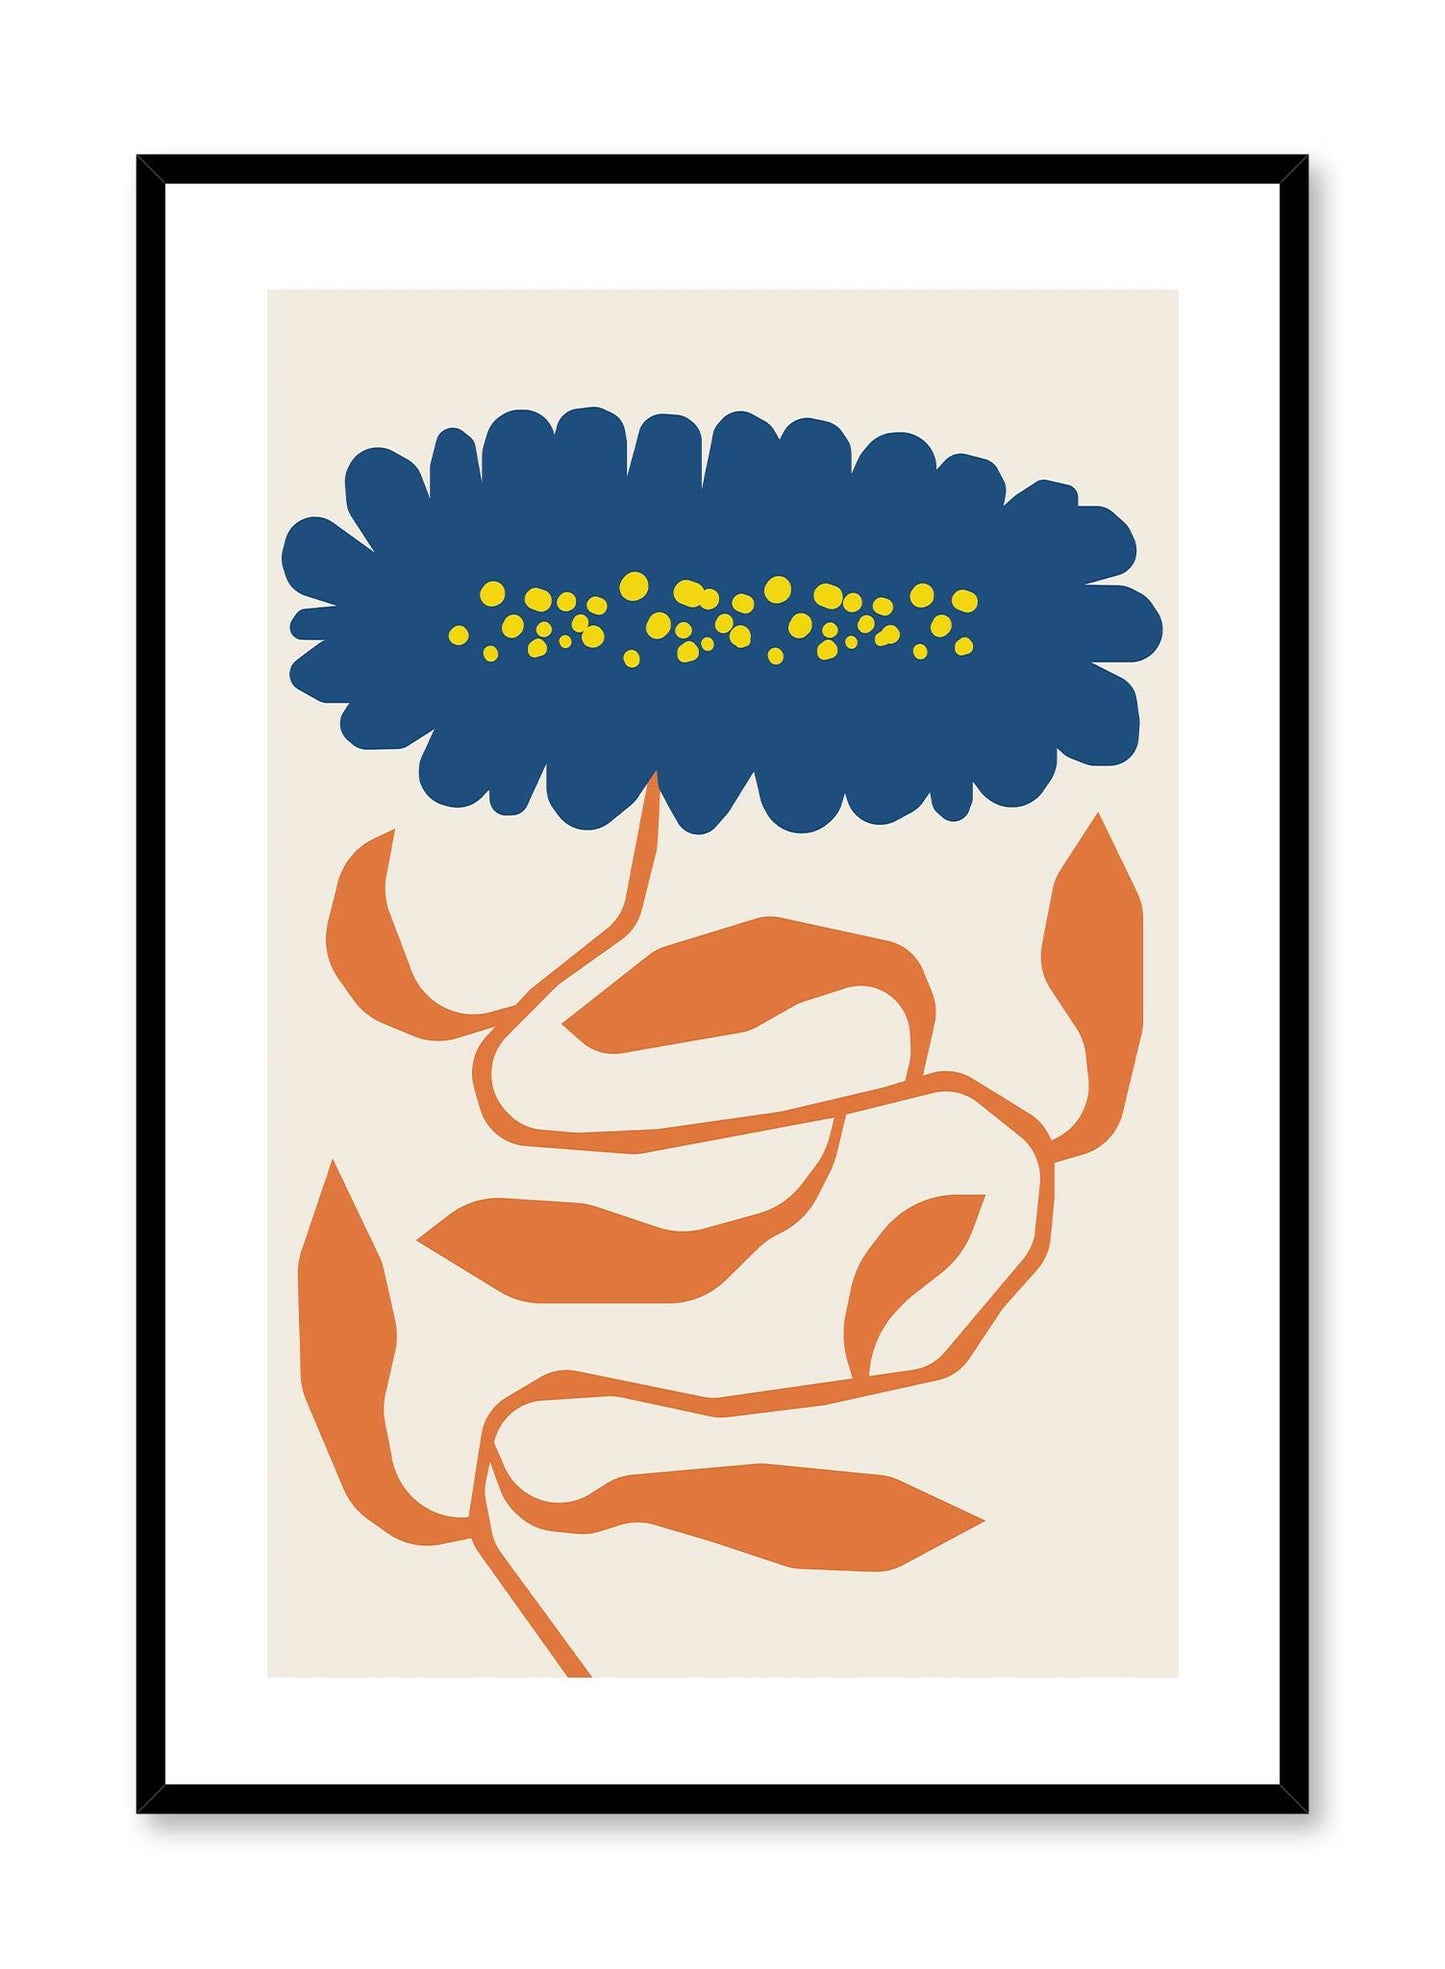 Regal Blossom is a vector illustration of orange leaves building up to an imposing and bold blue flower by Opposite Wall.